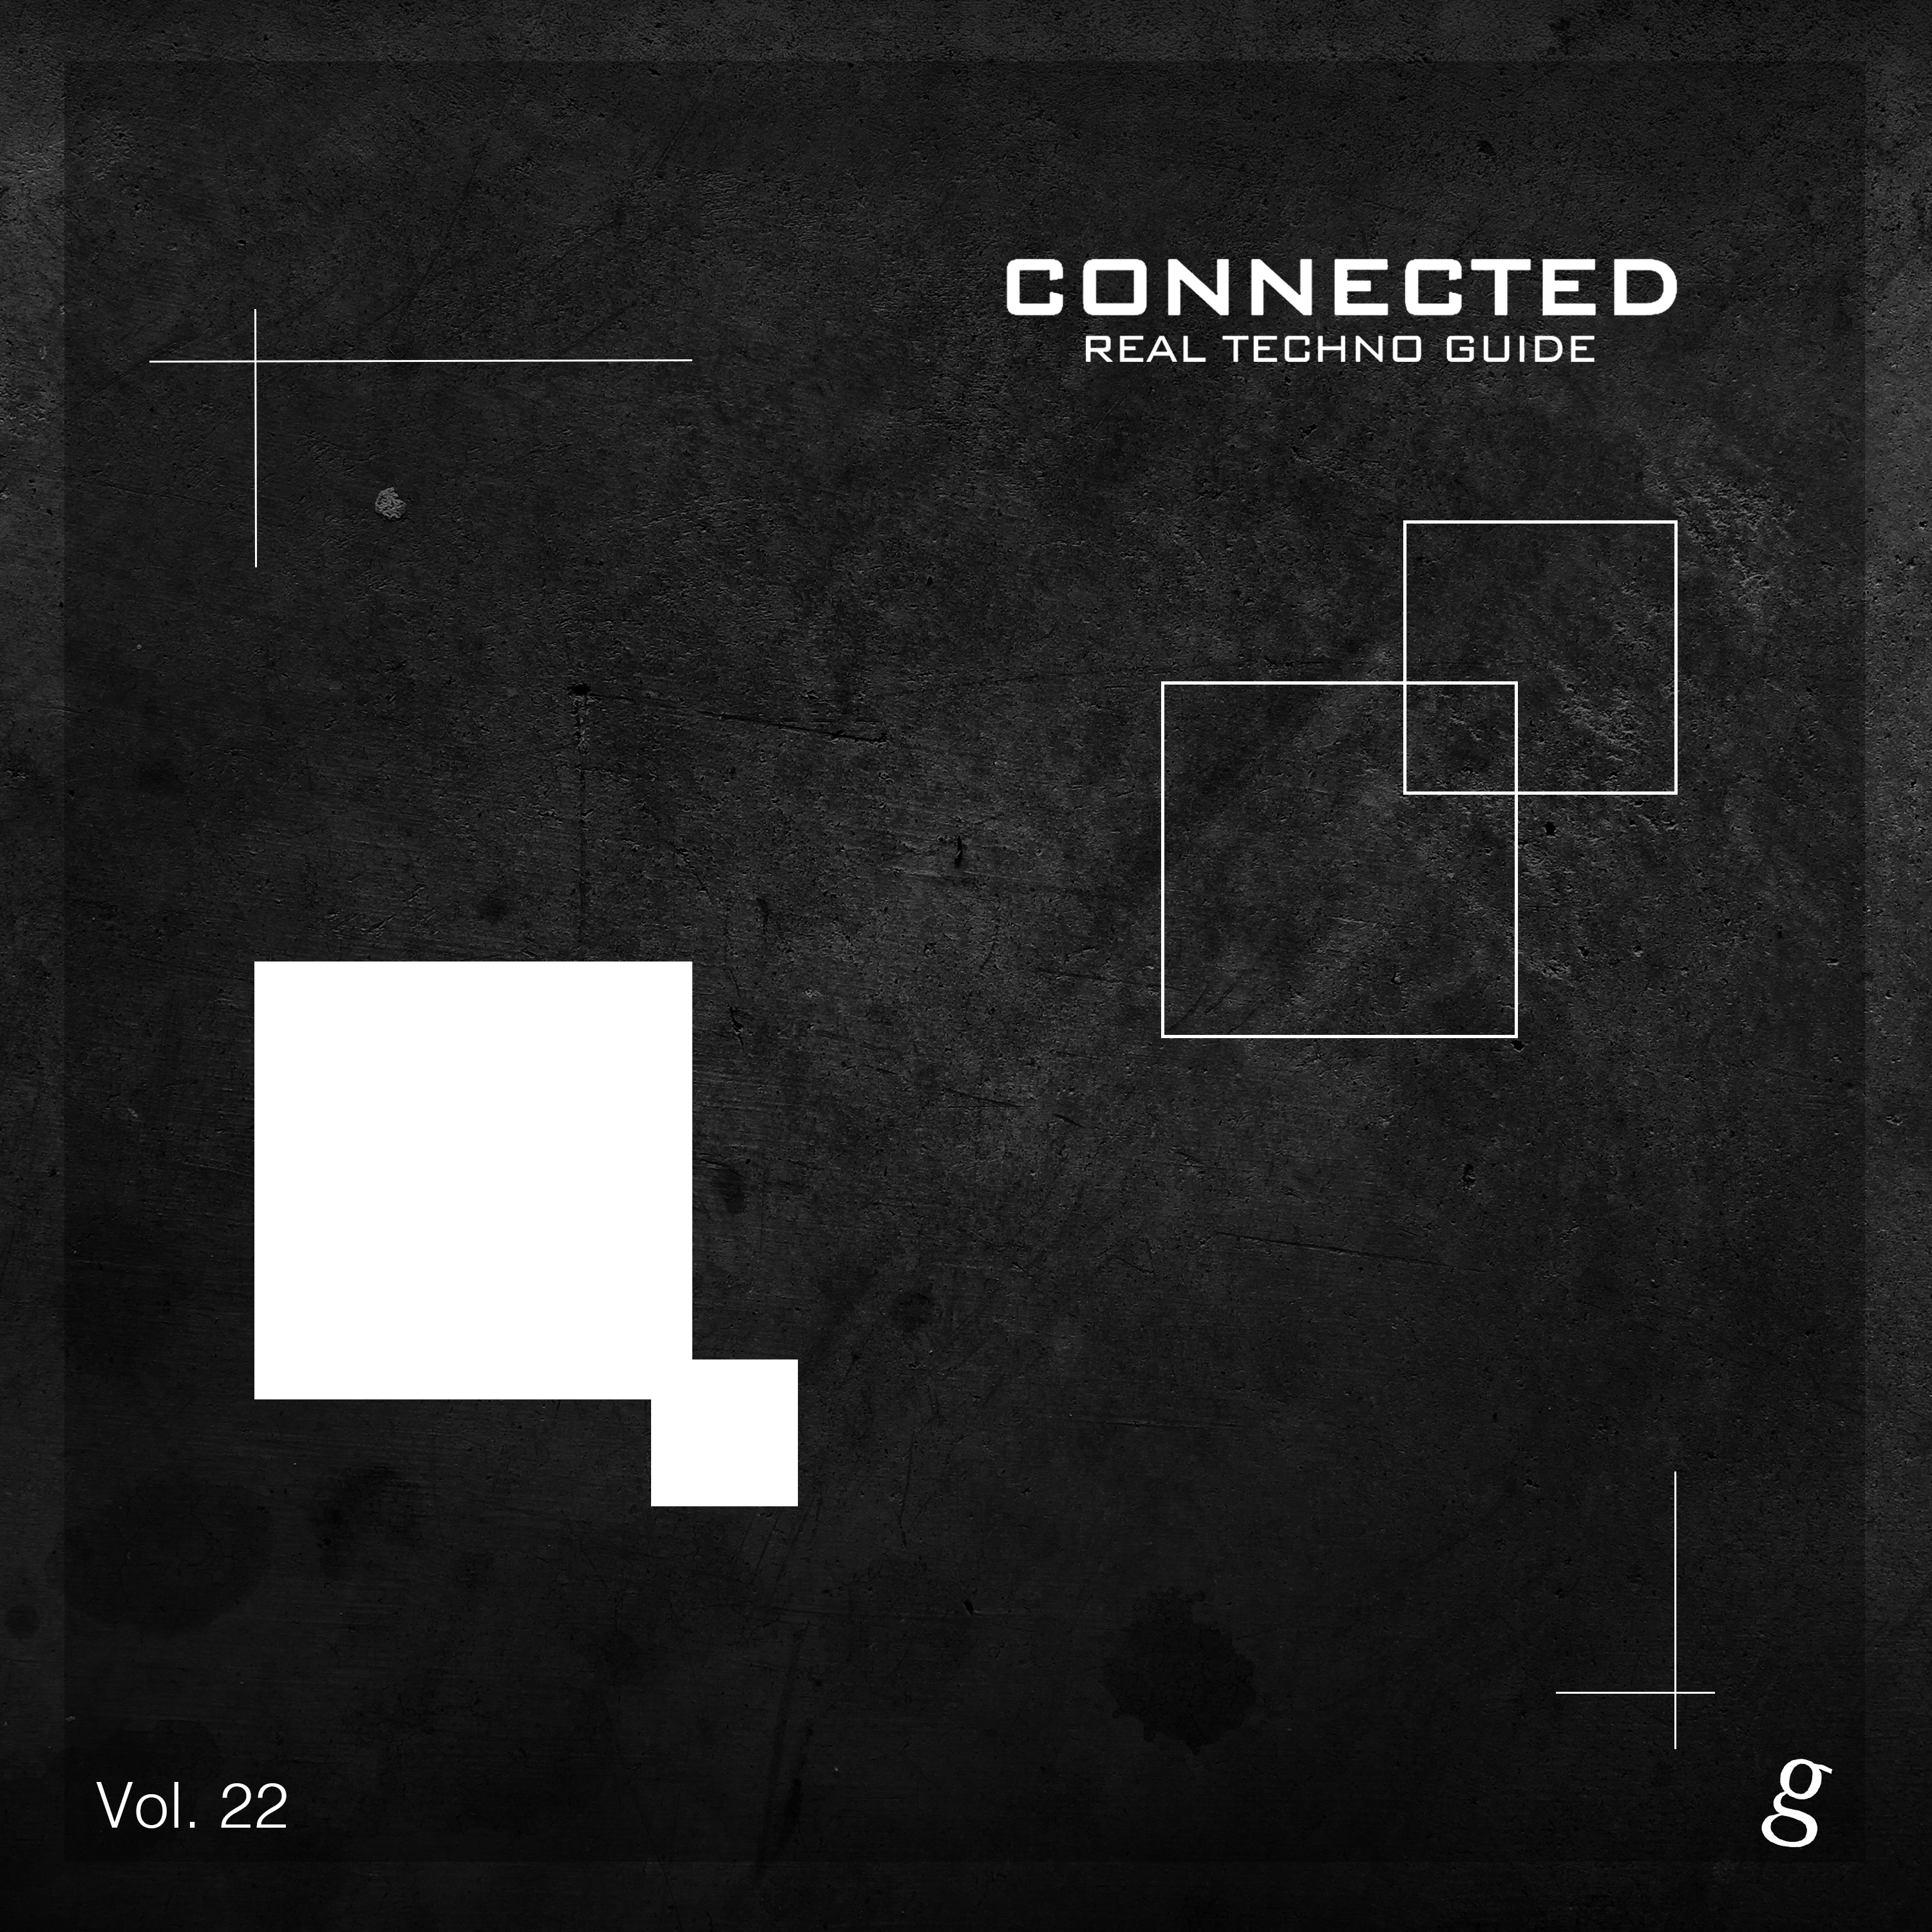 Connected, Vol. 22 - Real Techno Guide